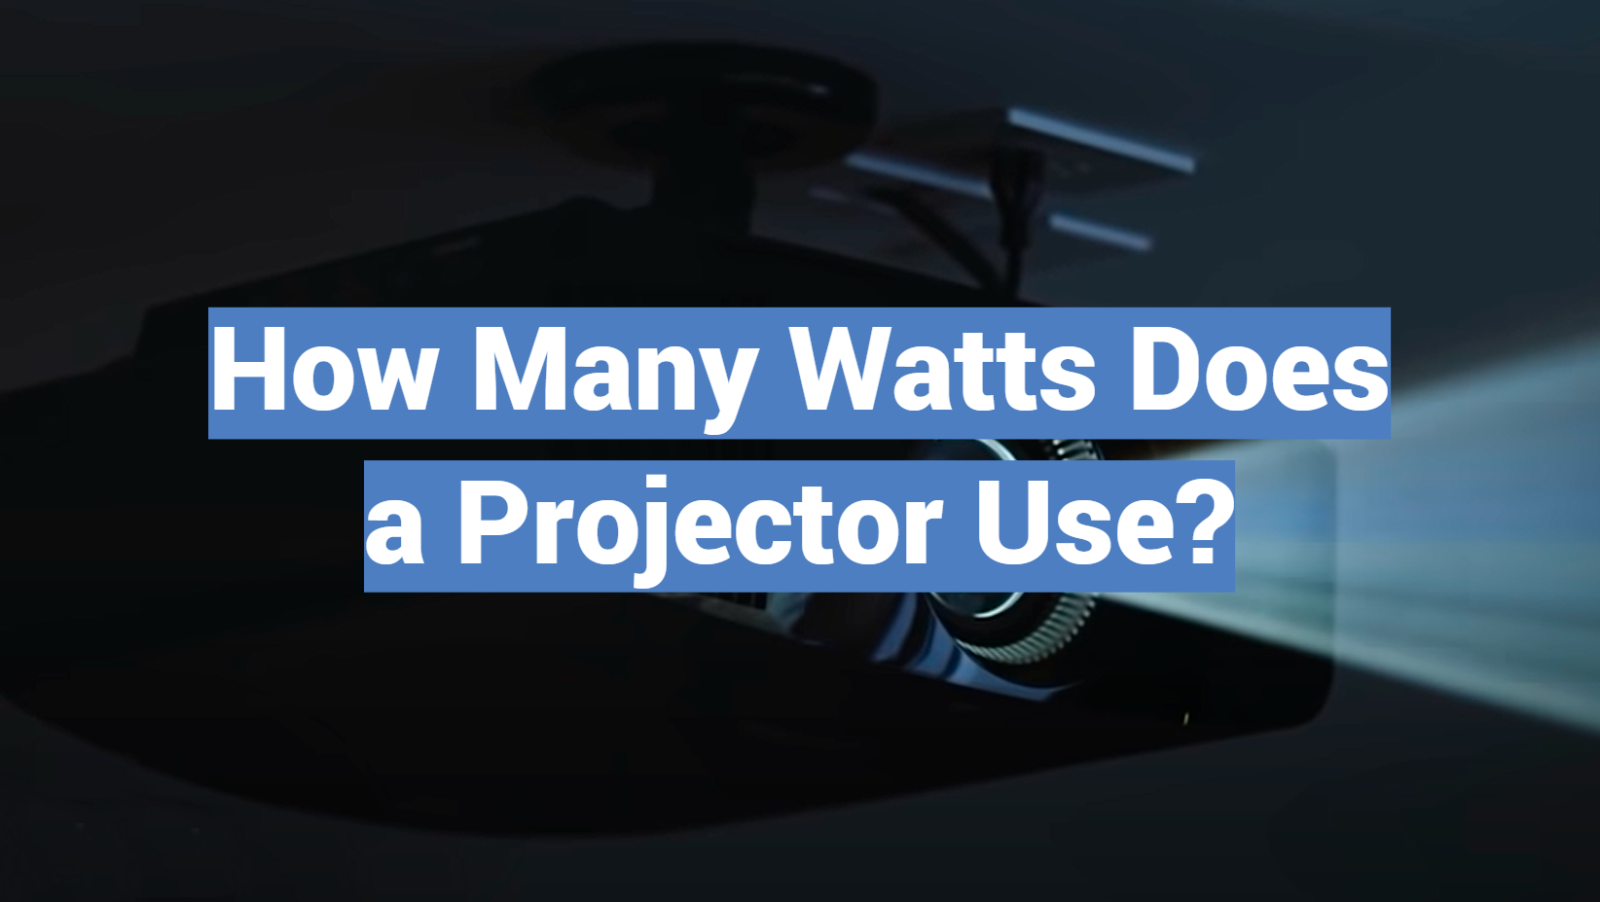 How Many Watts Does a Projector Use?